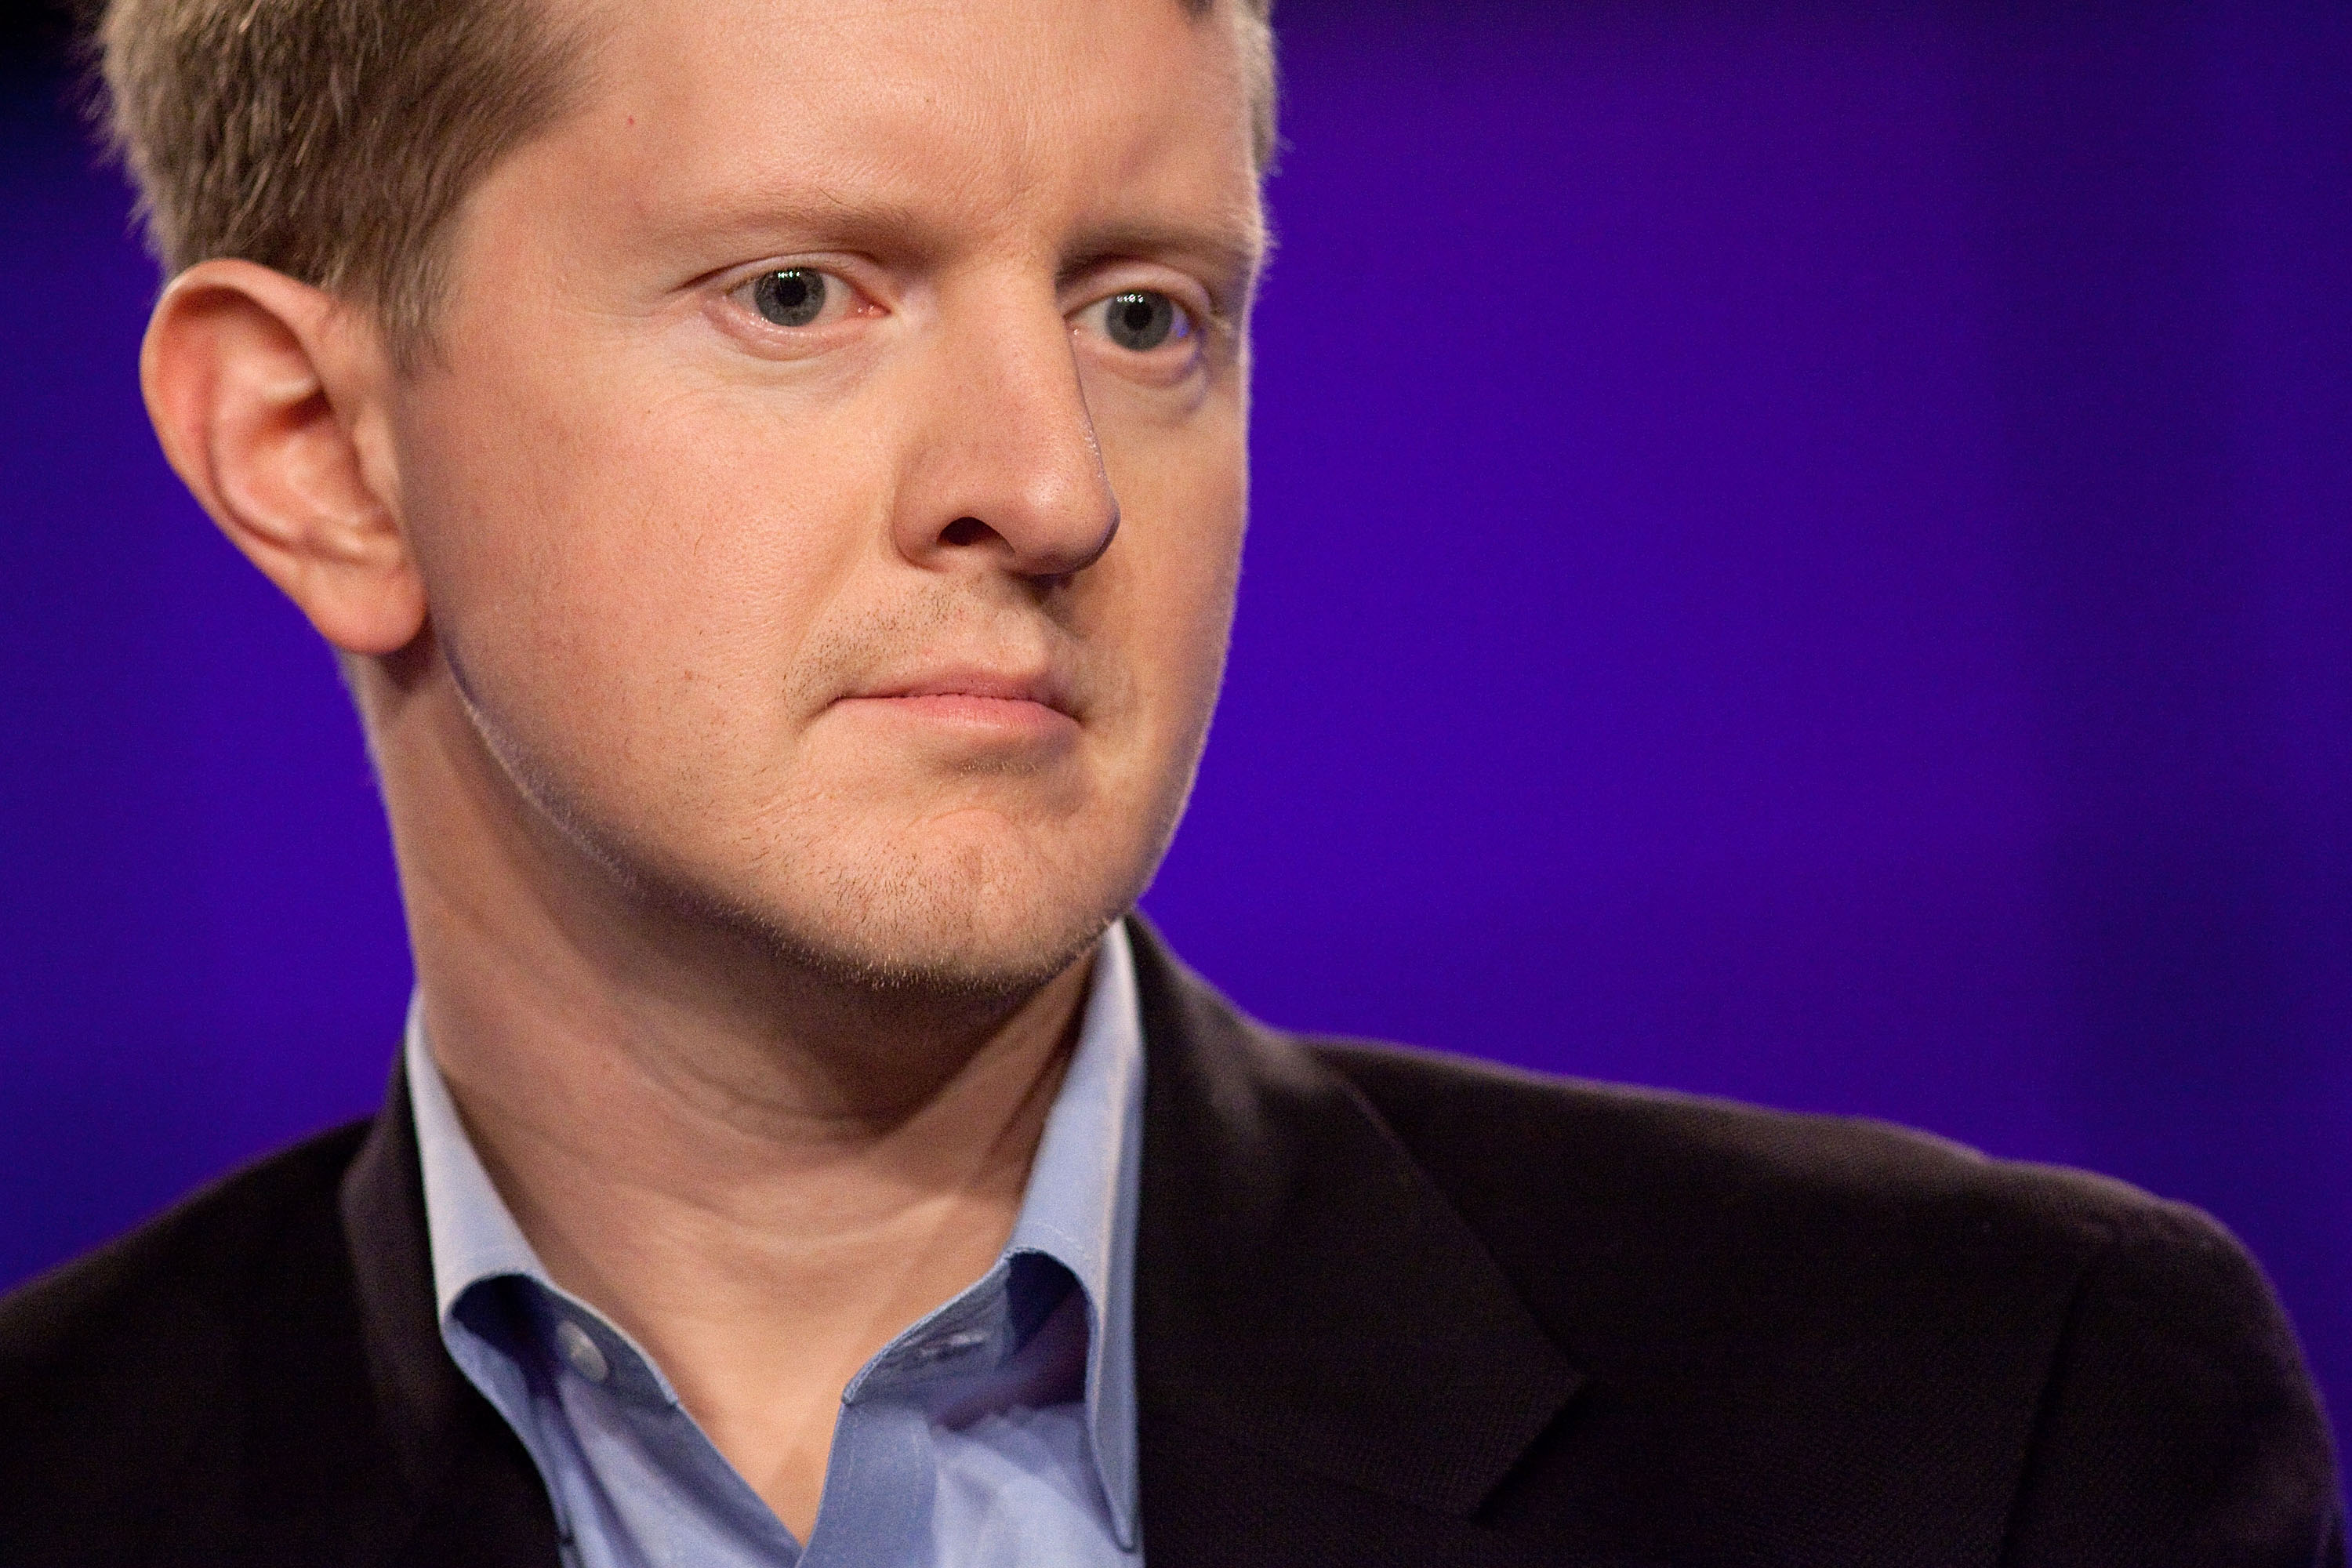 Ken Jennings attends a press conference on Jan. 13, 2011 in Yorktown Heights, N.Y. (Ben Hider—Getty Images)